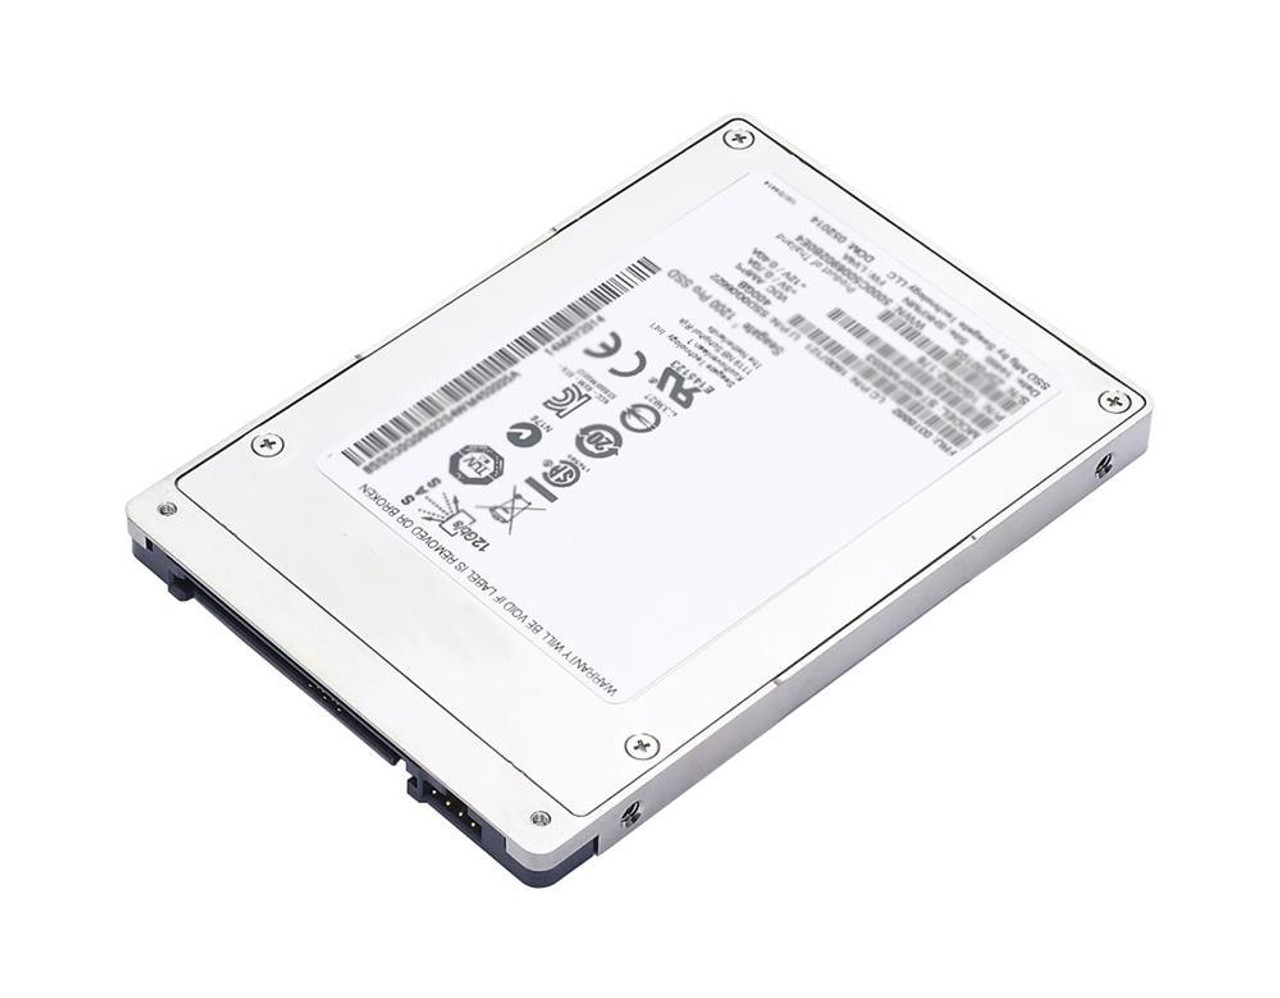 00E8713 IBM 775GB eMLC SAS 12Gbps (4K) 2.5-inch Internal Solid State Drive (SSD) for pSeries Servers